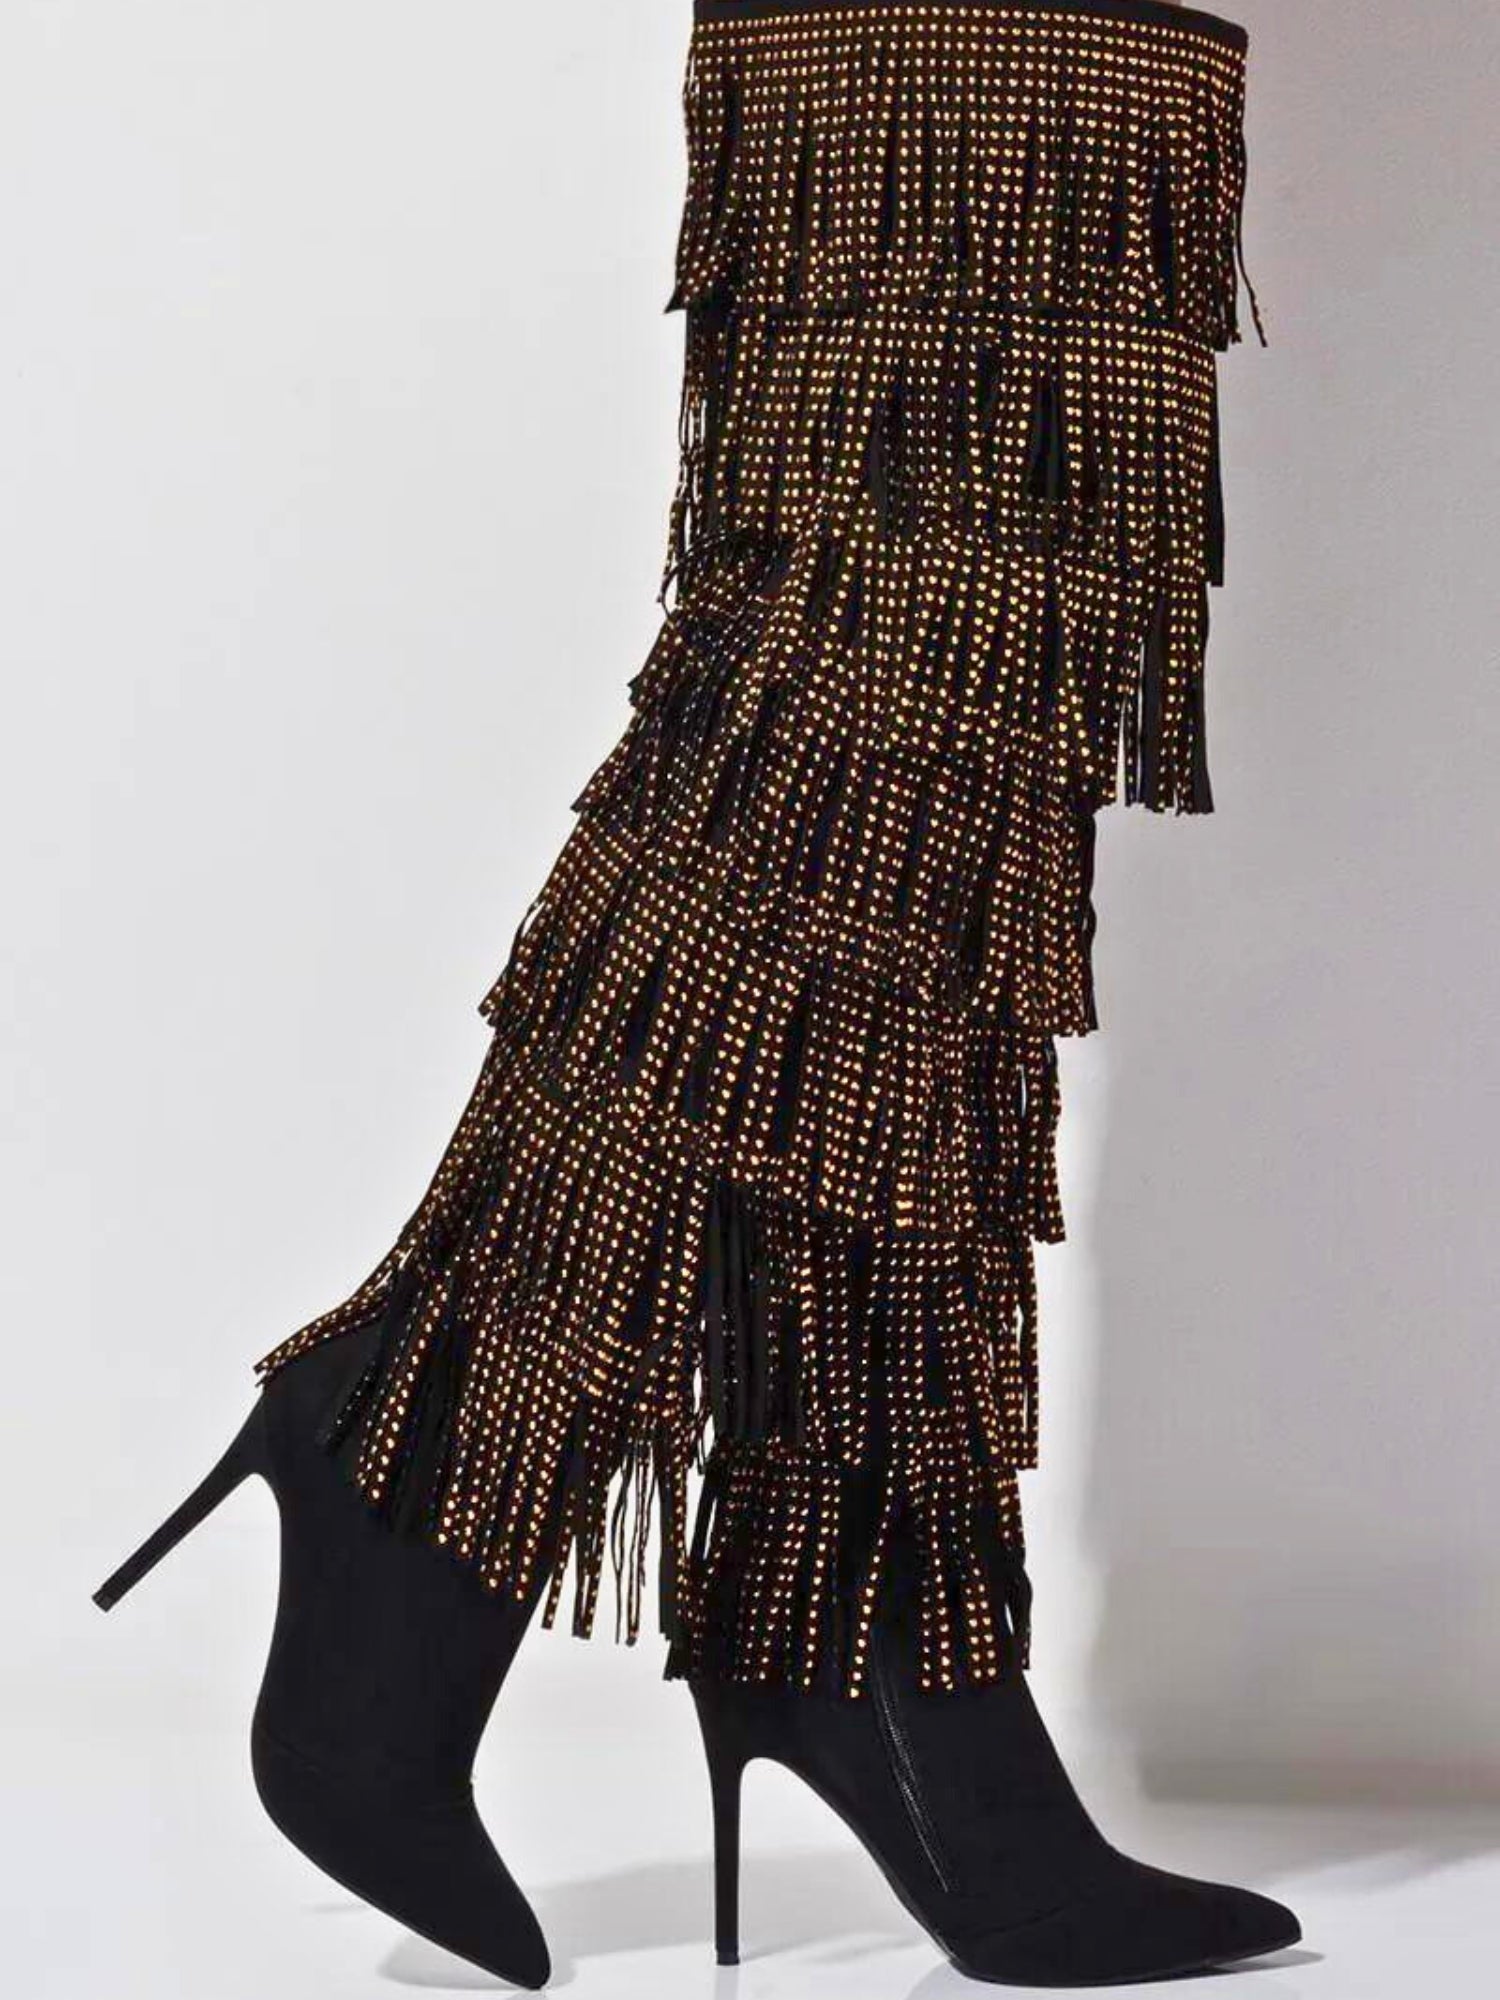 The Fringe Thigh High Stiletto Boots - The Fringe Thigh High Stiletto Boots by Azalea Wang are the definition of show stoppers! They are a need for anyone who loves to bring the drama! Draped in multi layers of fringe that is adorned in gold studs, this b